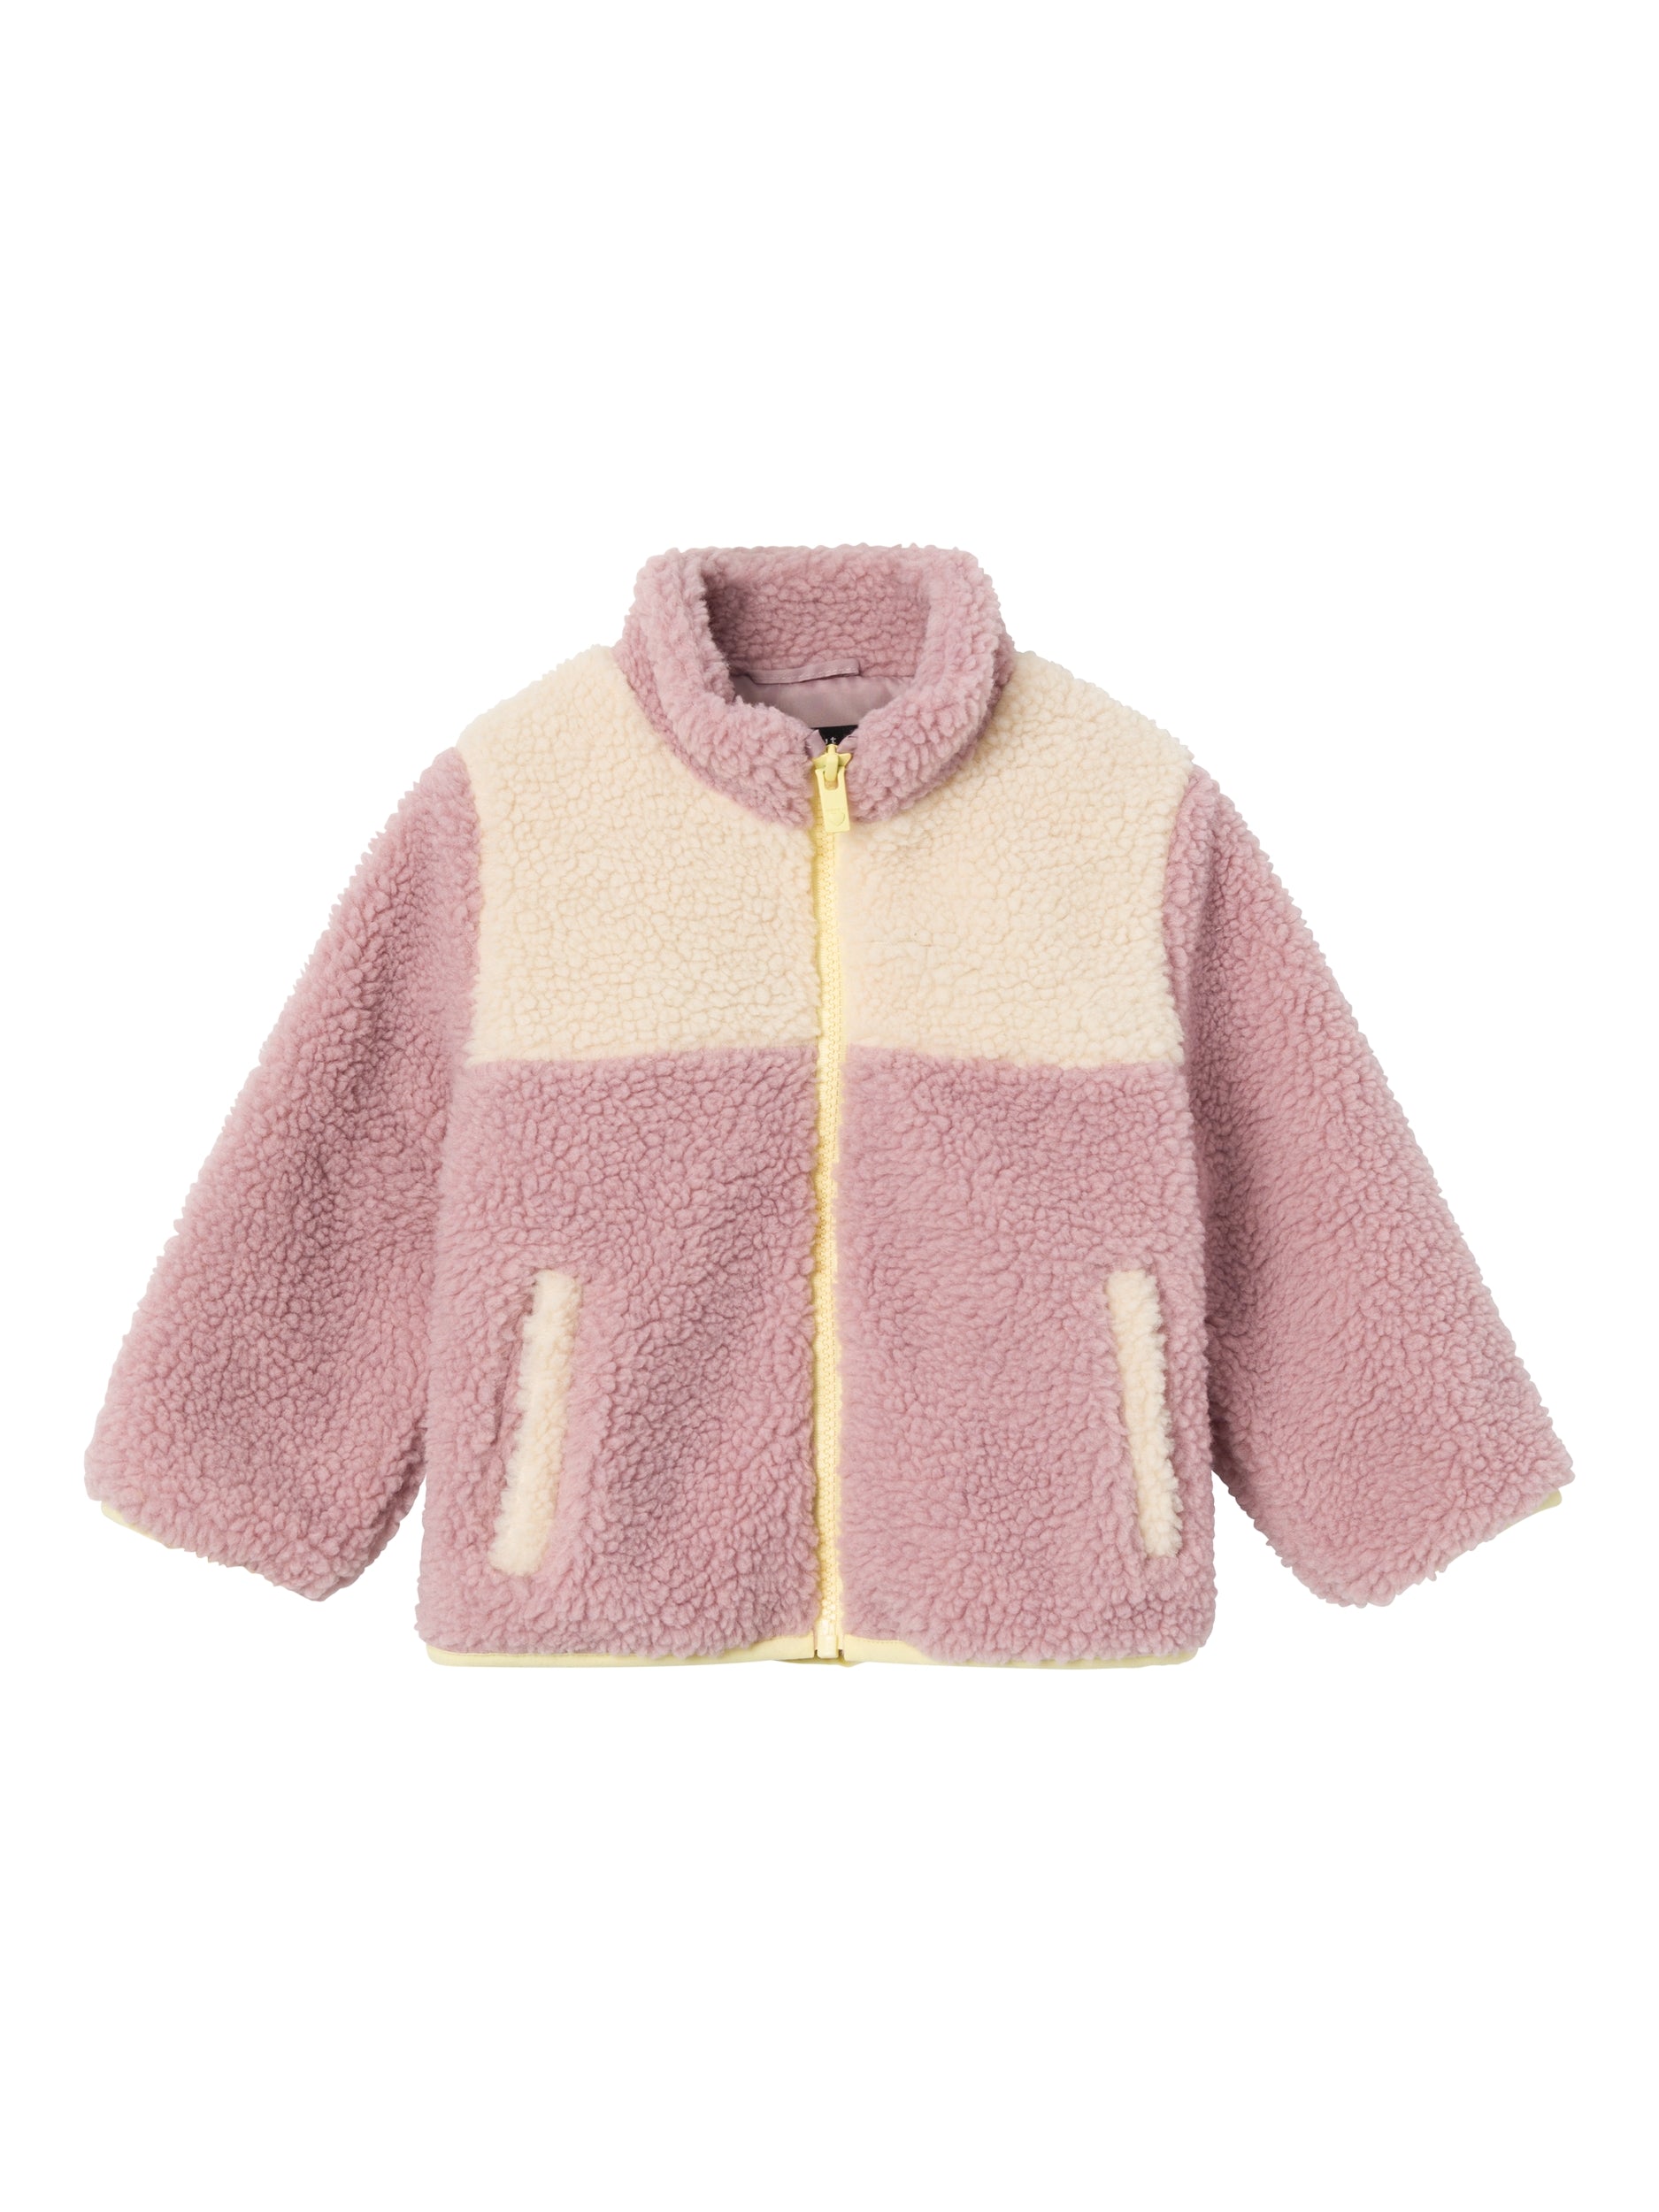 Girl's Melo Teddy Jacket-Burnished Lilac-Front View